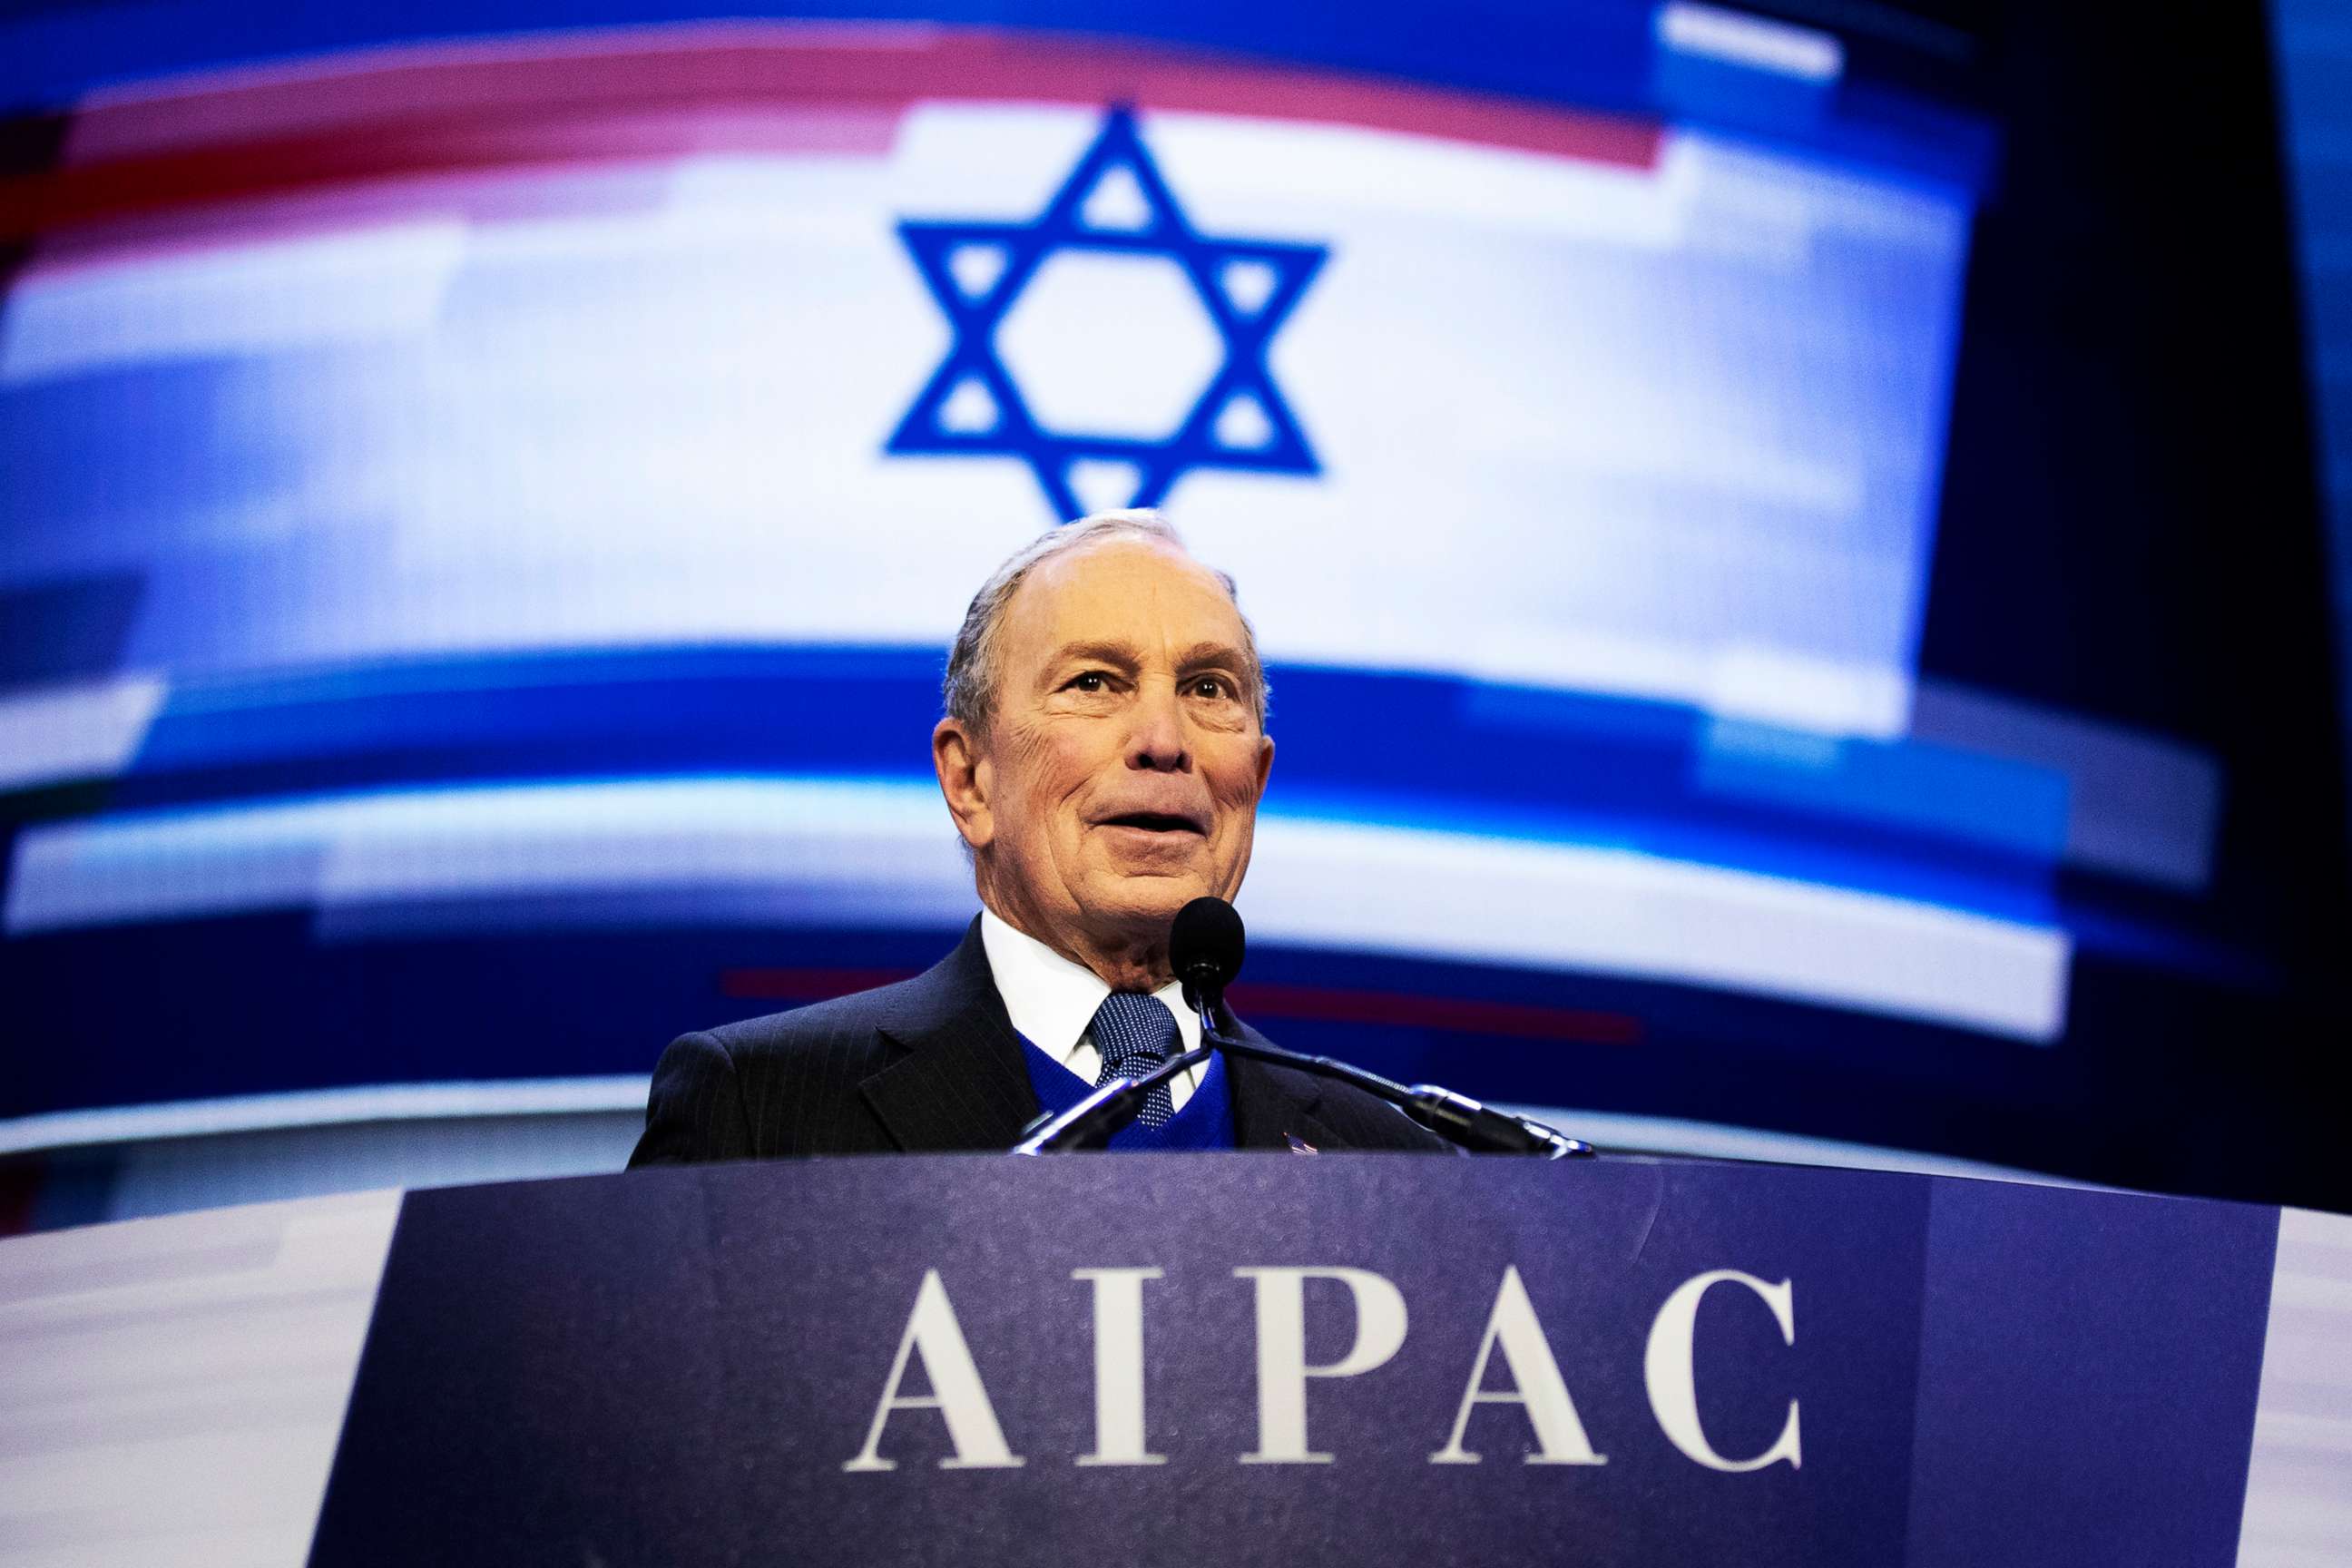 PHOTO: Democratic presidential candidate and former New York City Mayor Mike Bloomberg speaks at the American Israel Public Affairs Committee (AIPAC) 2020 Conference, March 2, 2020 in Washington.